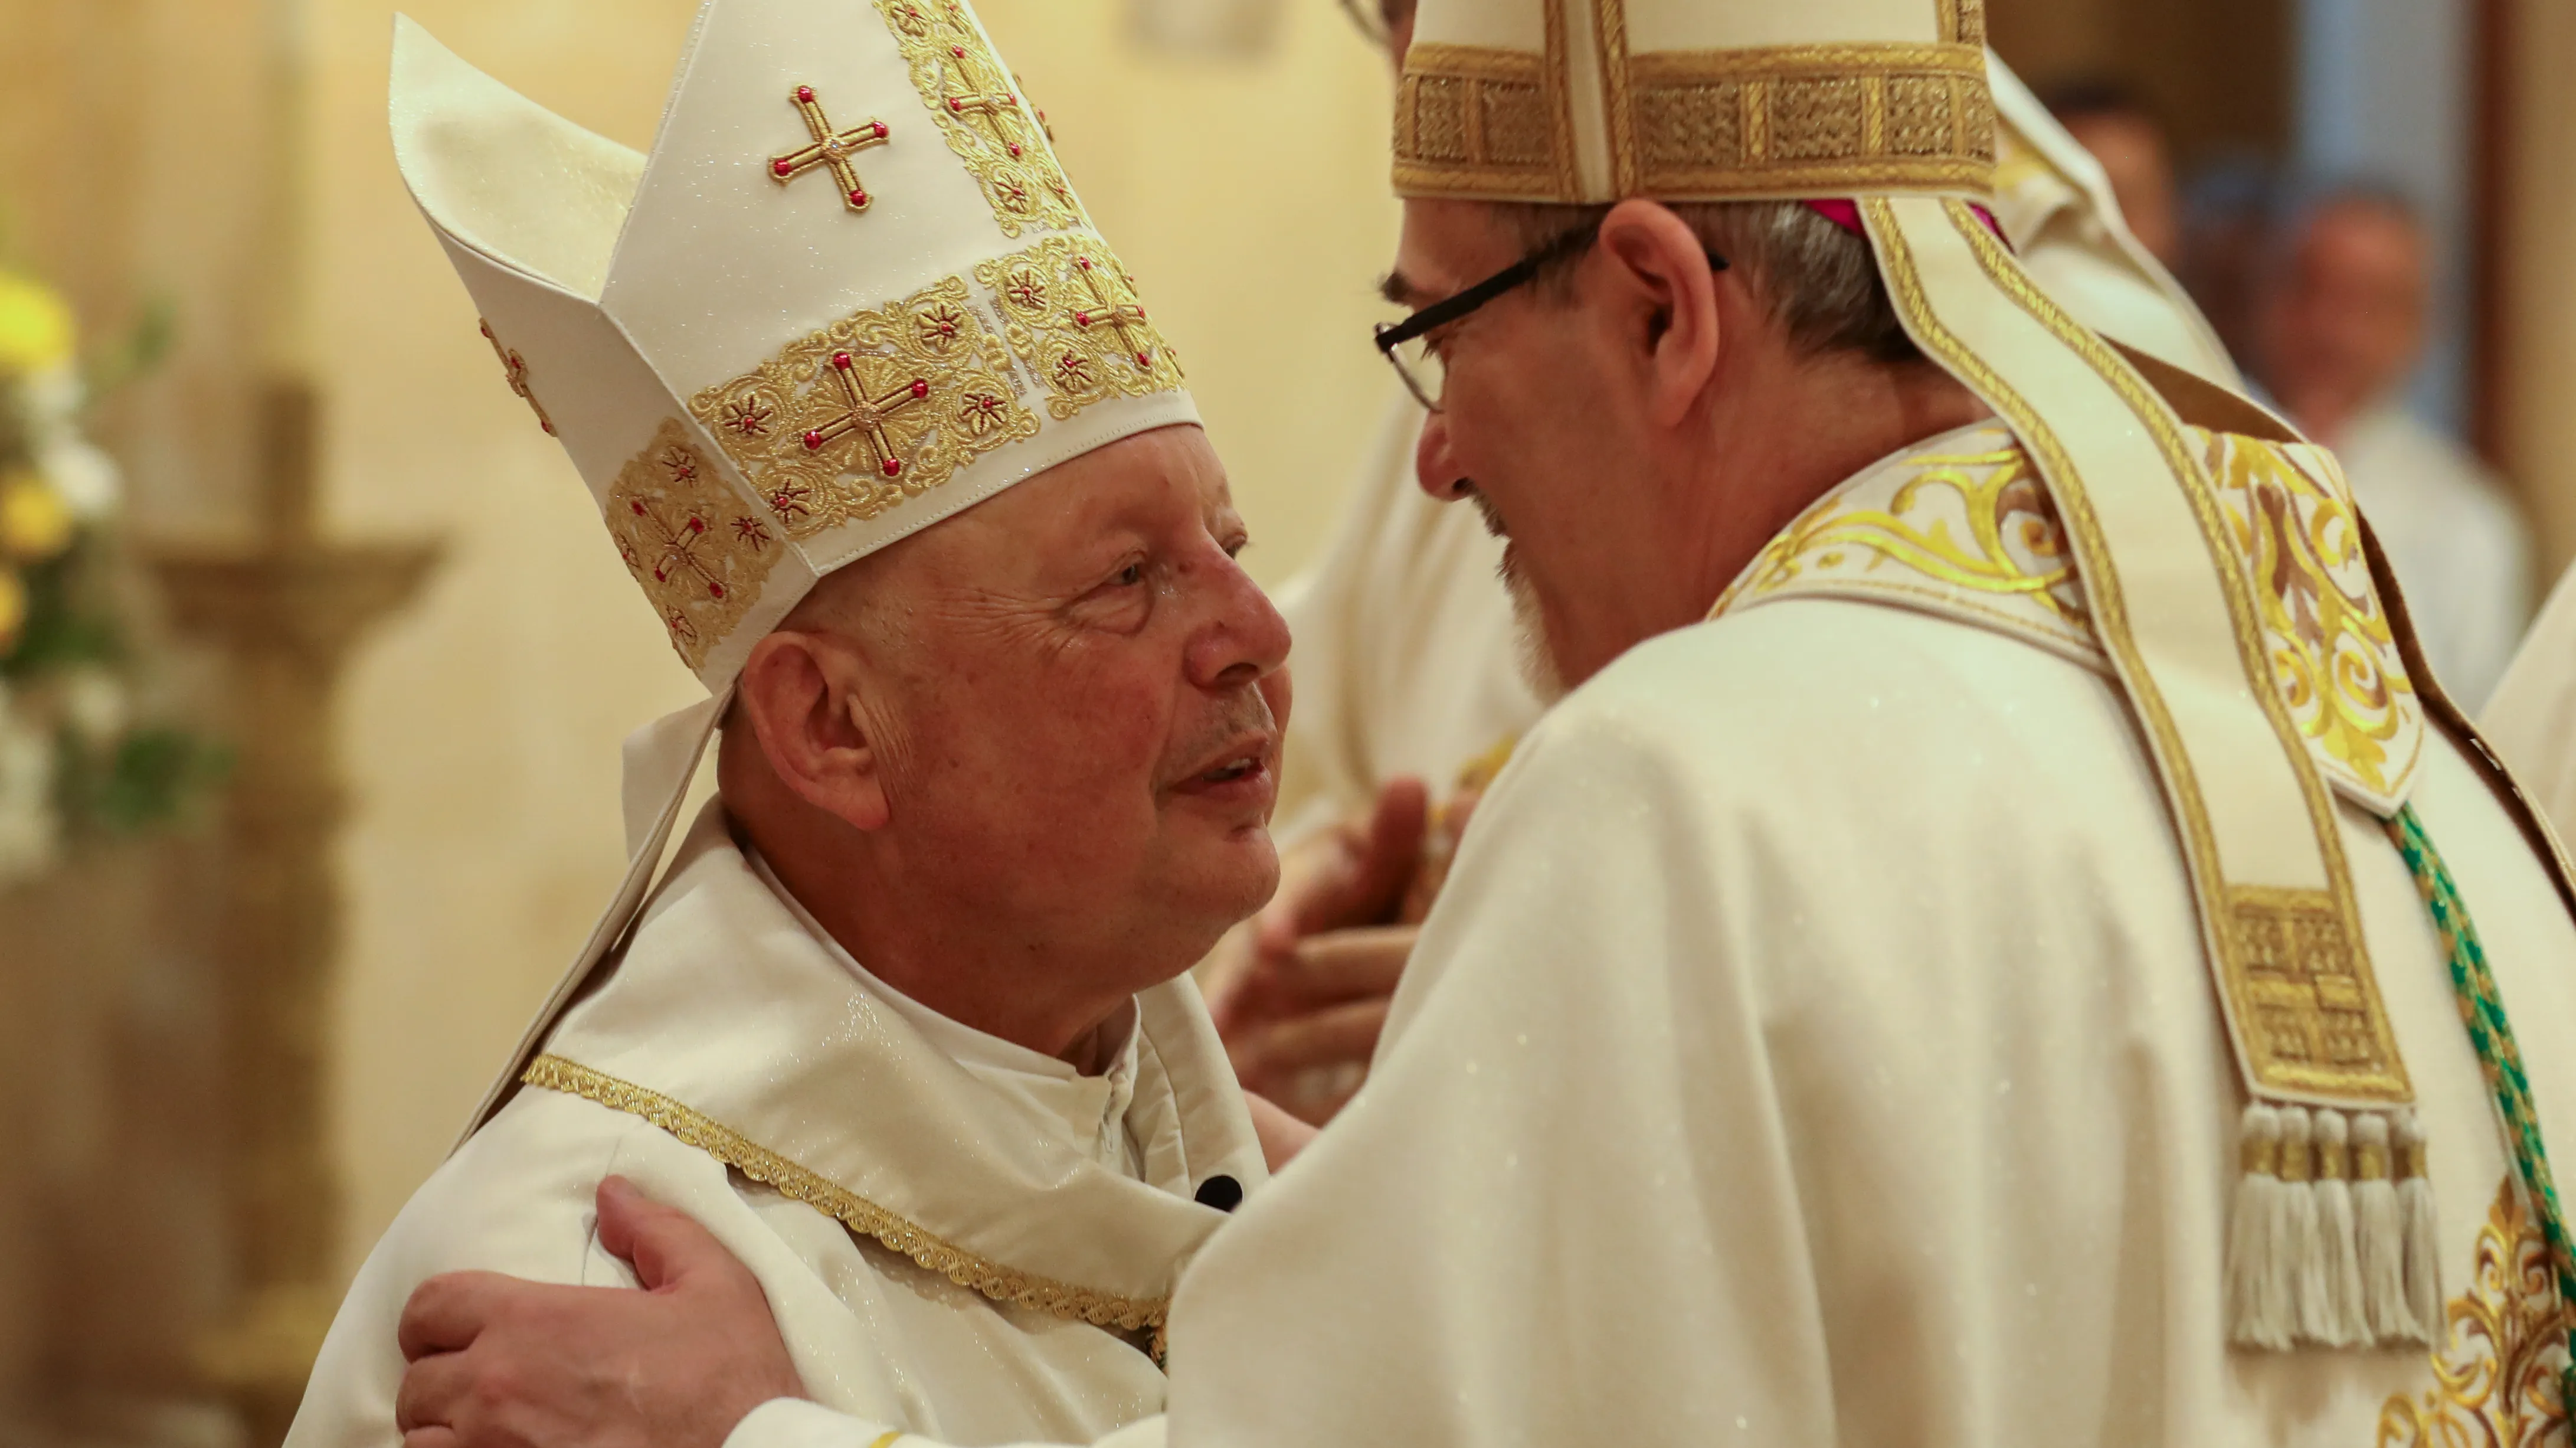 After his ordination Sept. 17, 2023, Bishop Hanna Jallouf, OFM, embraces the Latin patriarch of Jerusalem, Pierbattista Pizzaballa, who as custos of the Holy Land (2004-2016) was his direct superior. Credit: Photo courtesy of TEWK CENTER